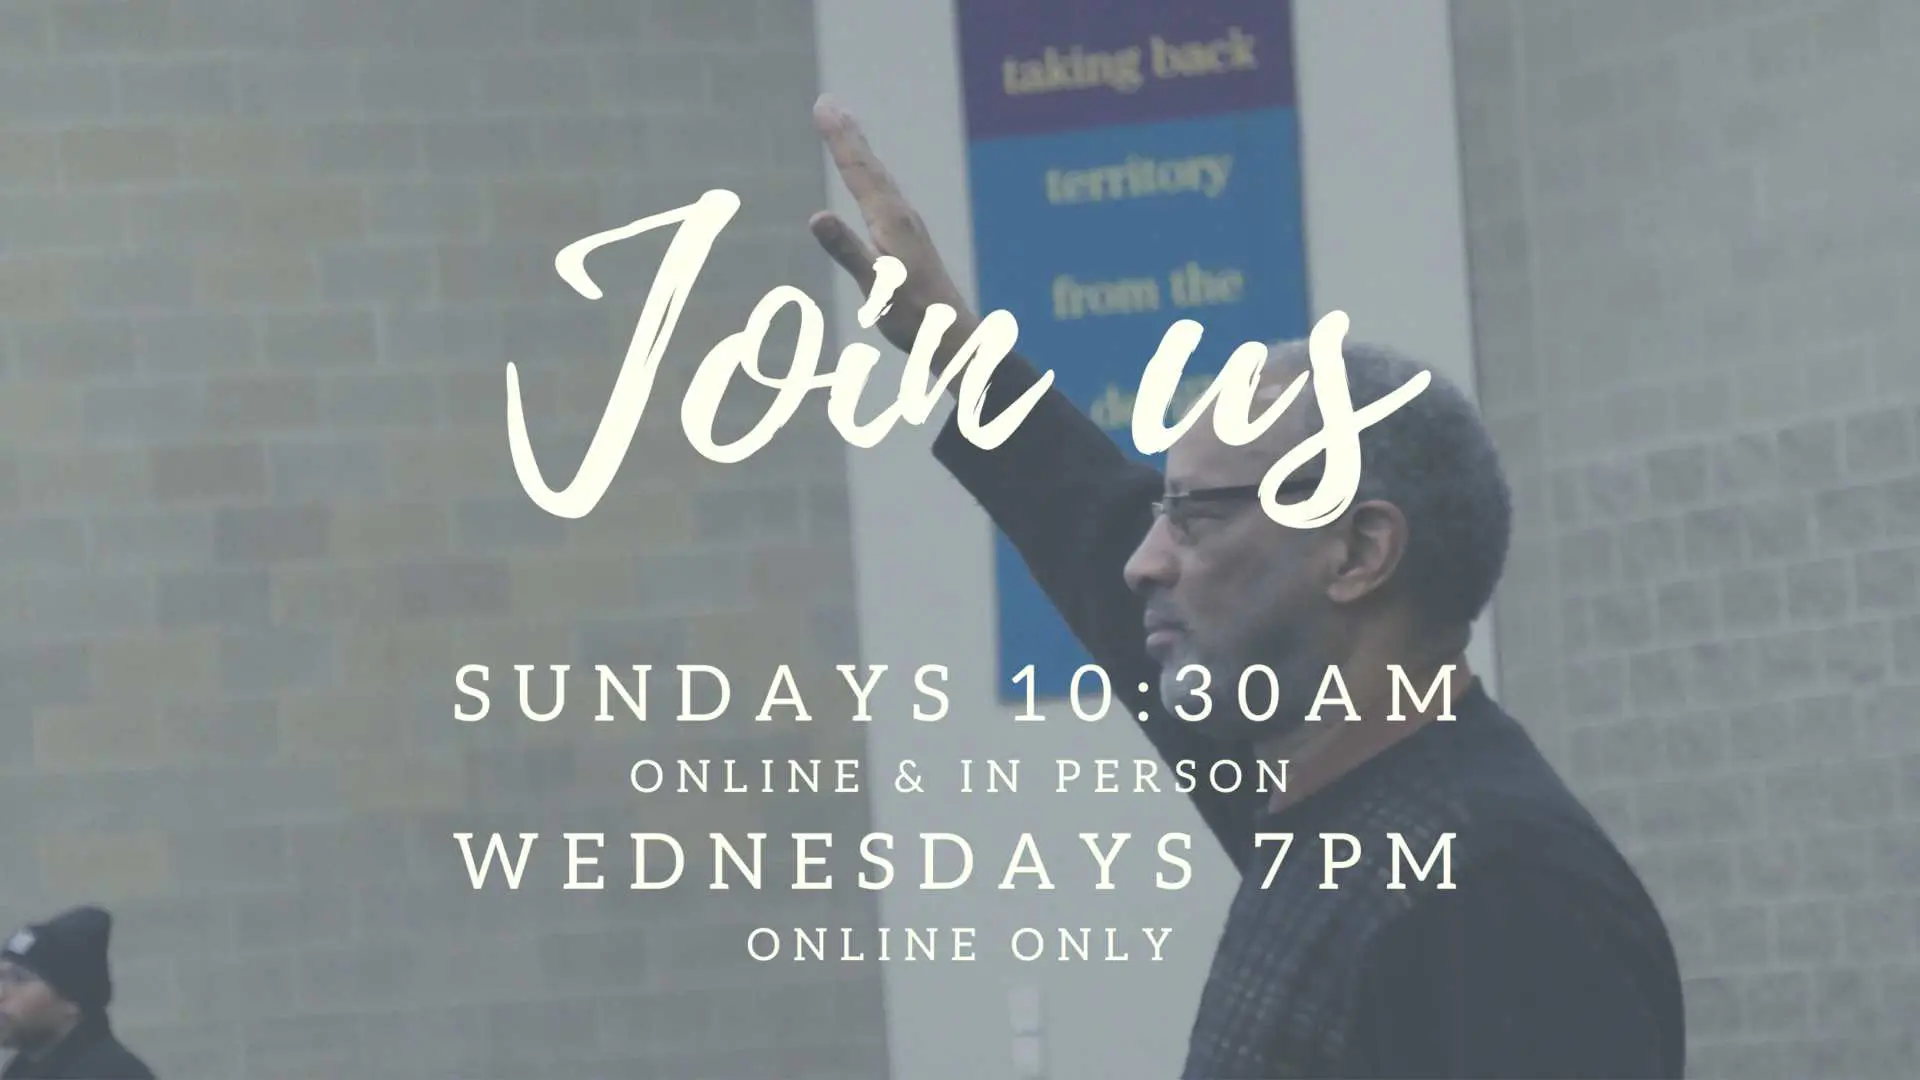 Join us sundays at 10 am online and wednesdays at 7 pm.